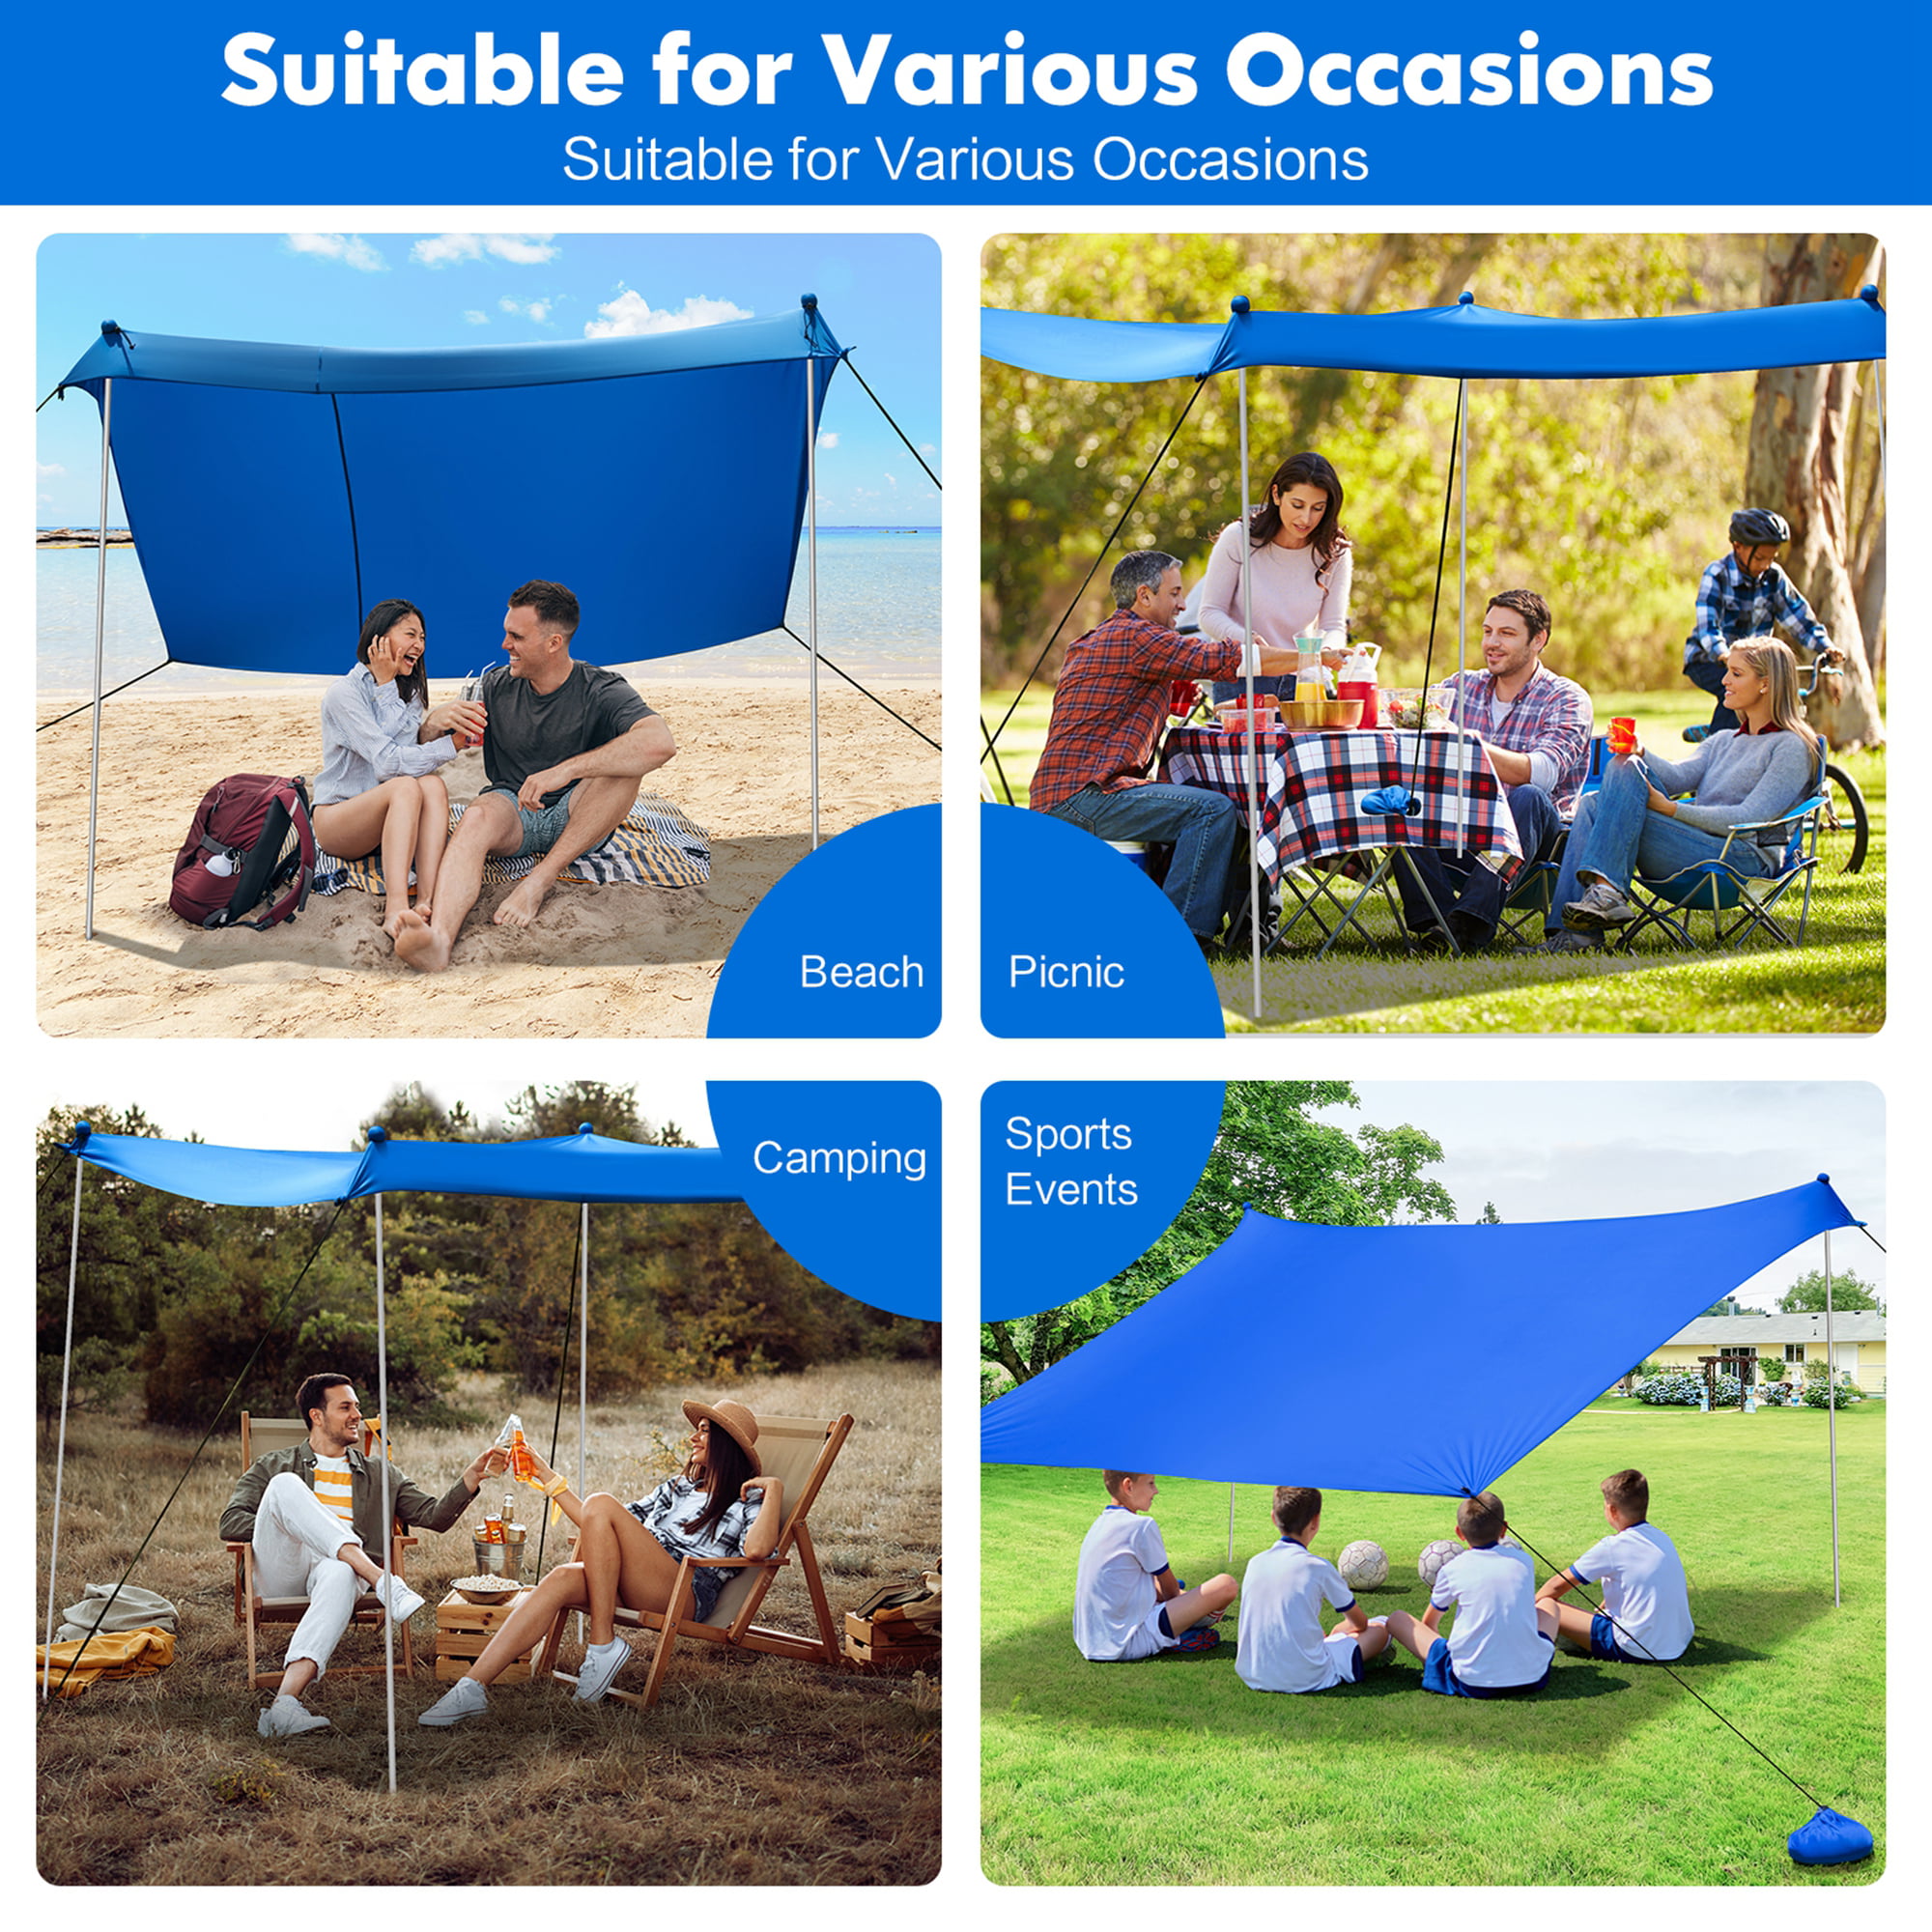  Beach Tent Canopy Beach Shade 10x10ft UPF50+ Sun Shelter with  8 Sand Bags 4 Stable Poles Sand Shovel JSCARES Cabana for 8 Person Portable  Outdoor Shade for Camping Trip Fishing